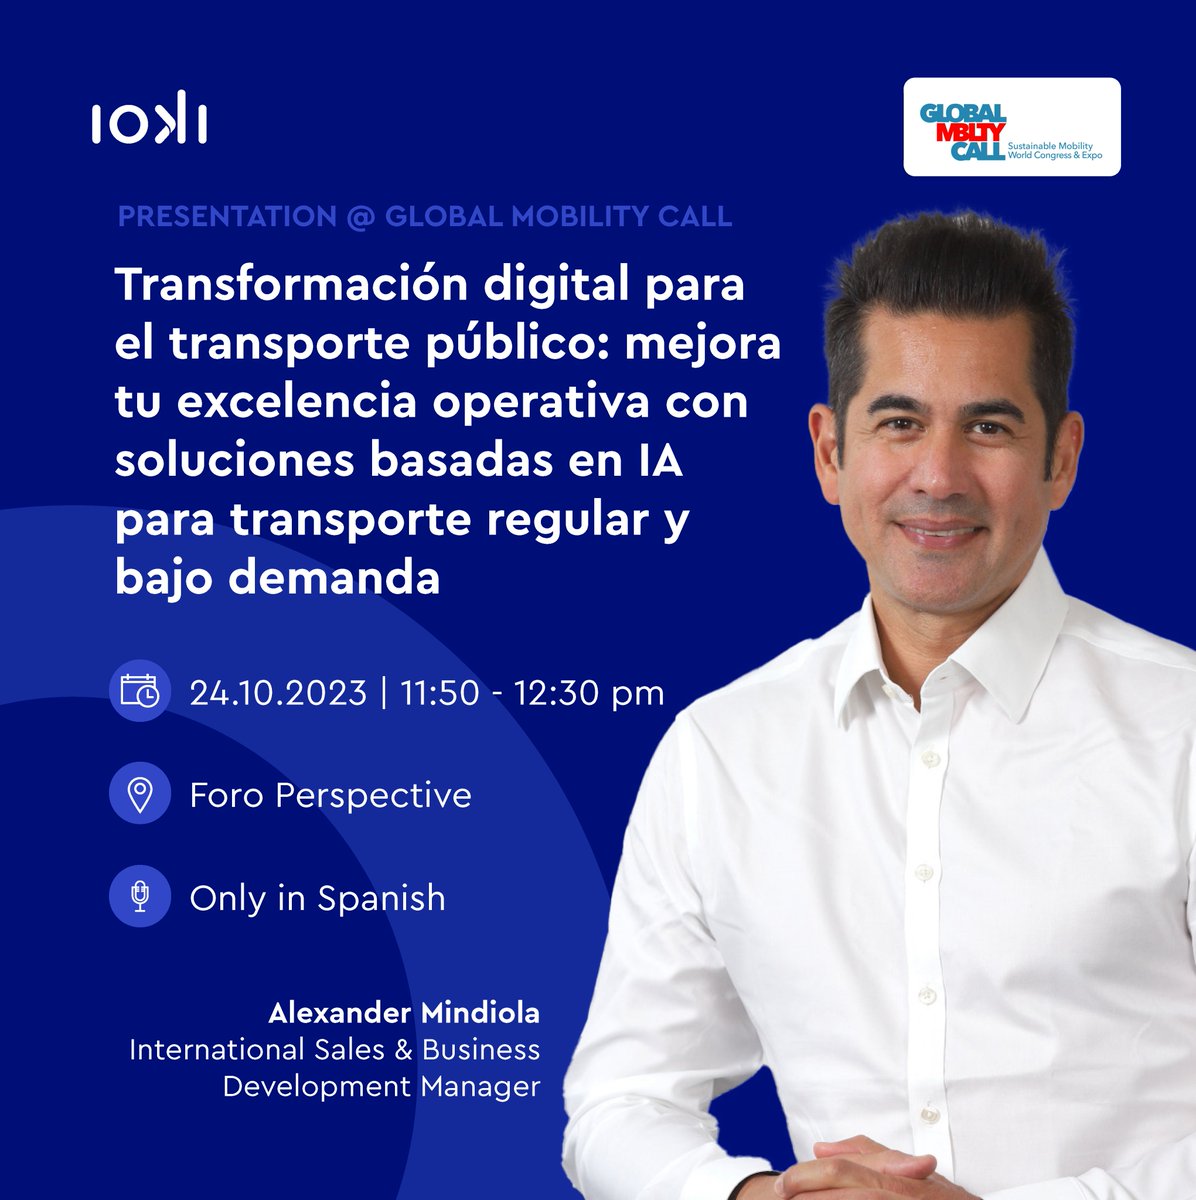 When global mobility calls, we answer 📞 Together with our partner Optibus we are attending the #GlobalMobilityCall in Madrid! Alexander Mindiola will also give a presentation about the #digitaltransformation of #publictransport 🤖🚌 Get tickets here 👉ifema.es/en/global-mobi…